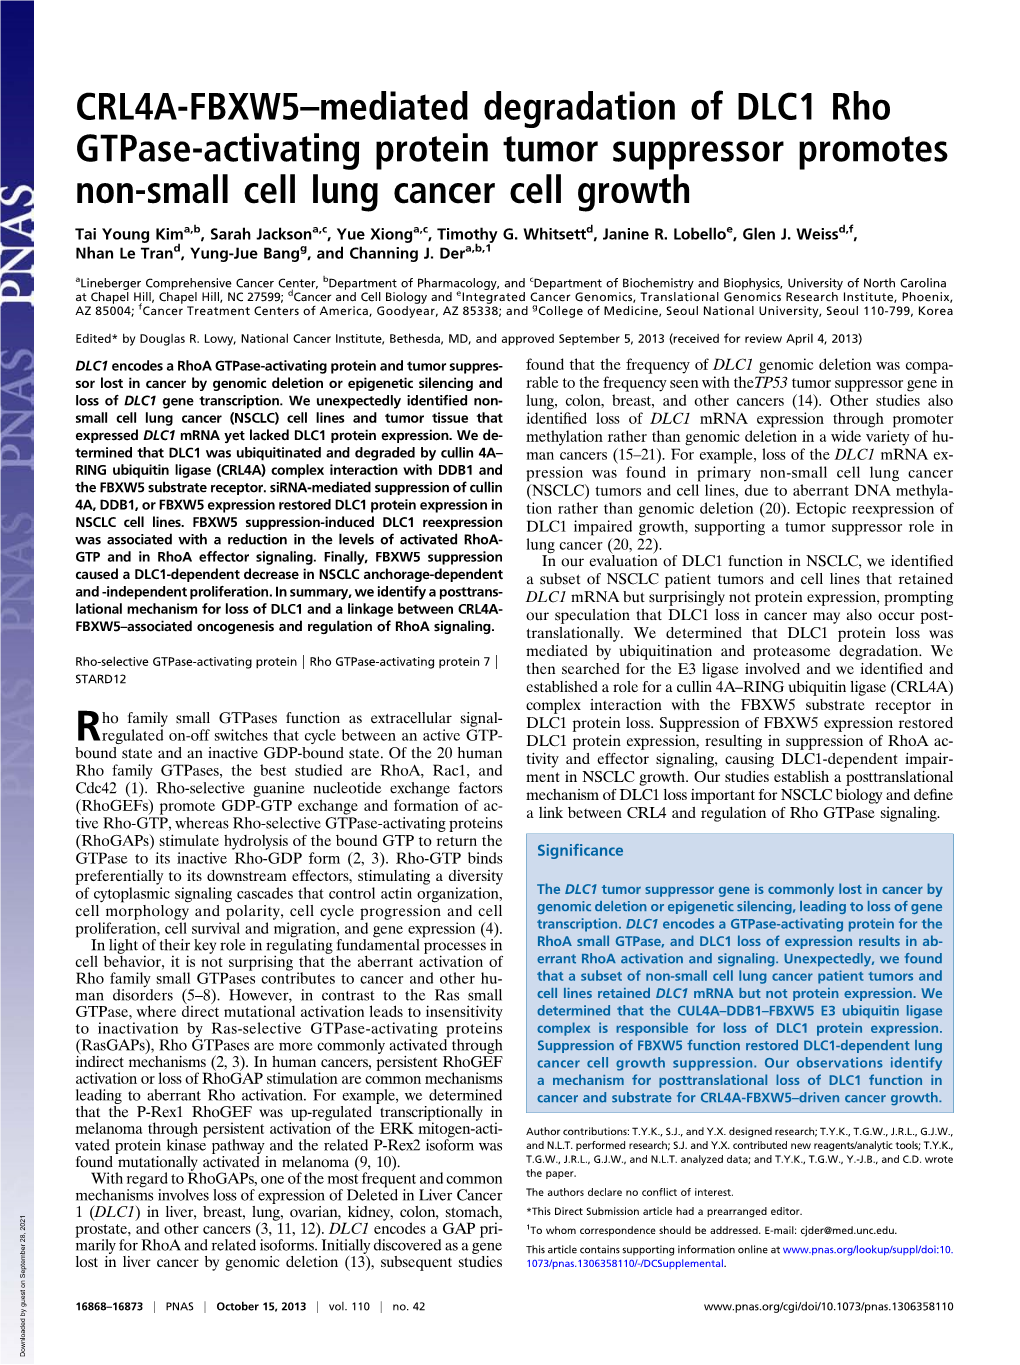 CRL4A-FBXW5–Mediated Degradation of DLC1 Rho Gtpase-Activating Protein Tumor Suppressor Promotes Non-Small Cell Lung Cancer Cell Growth